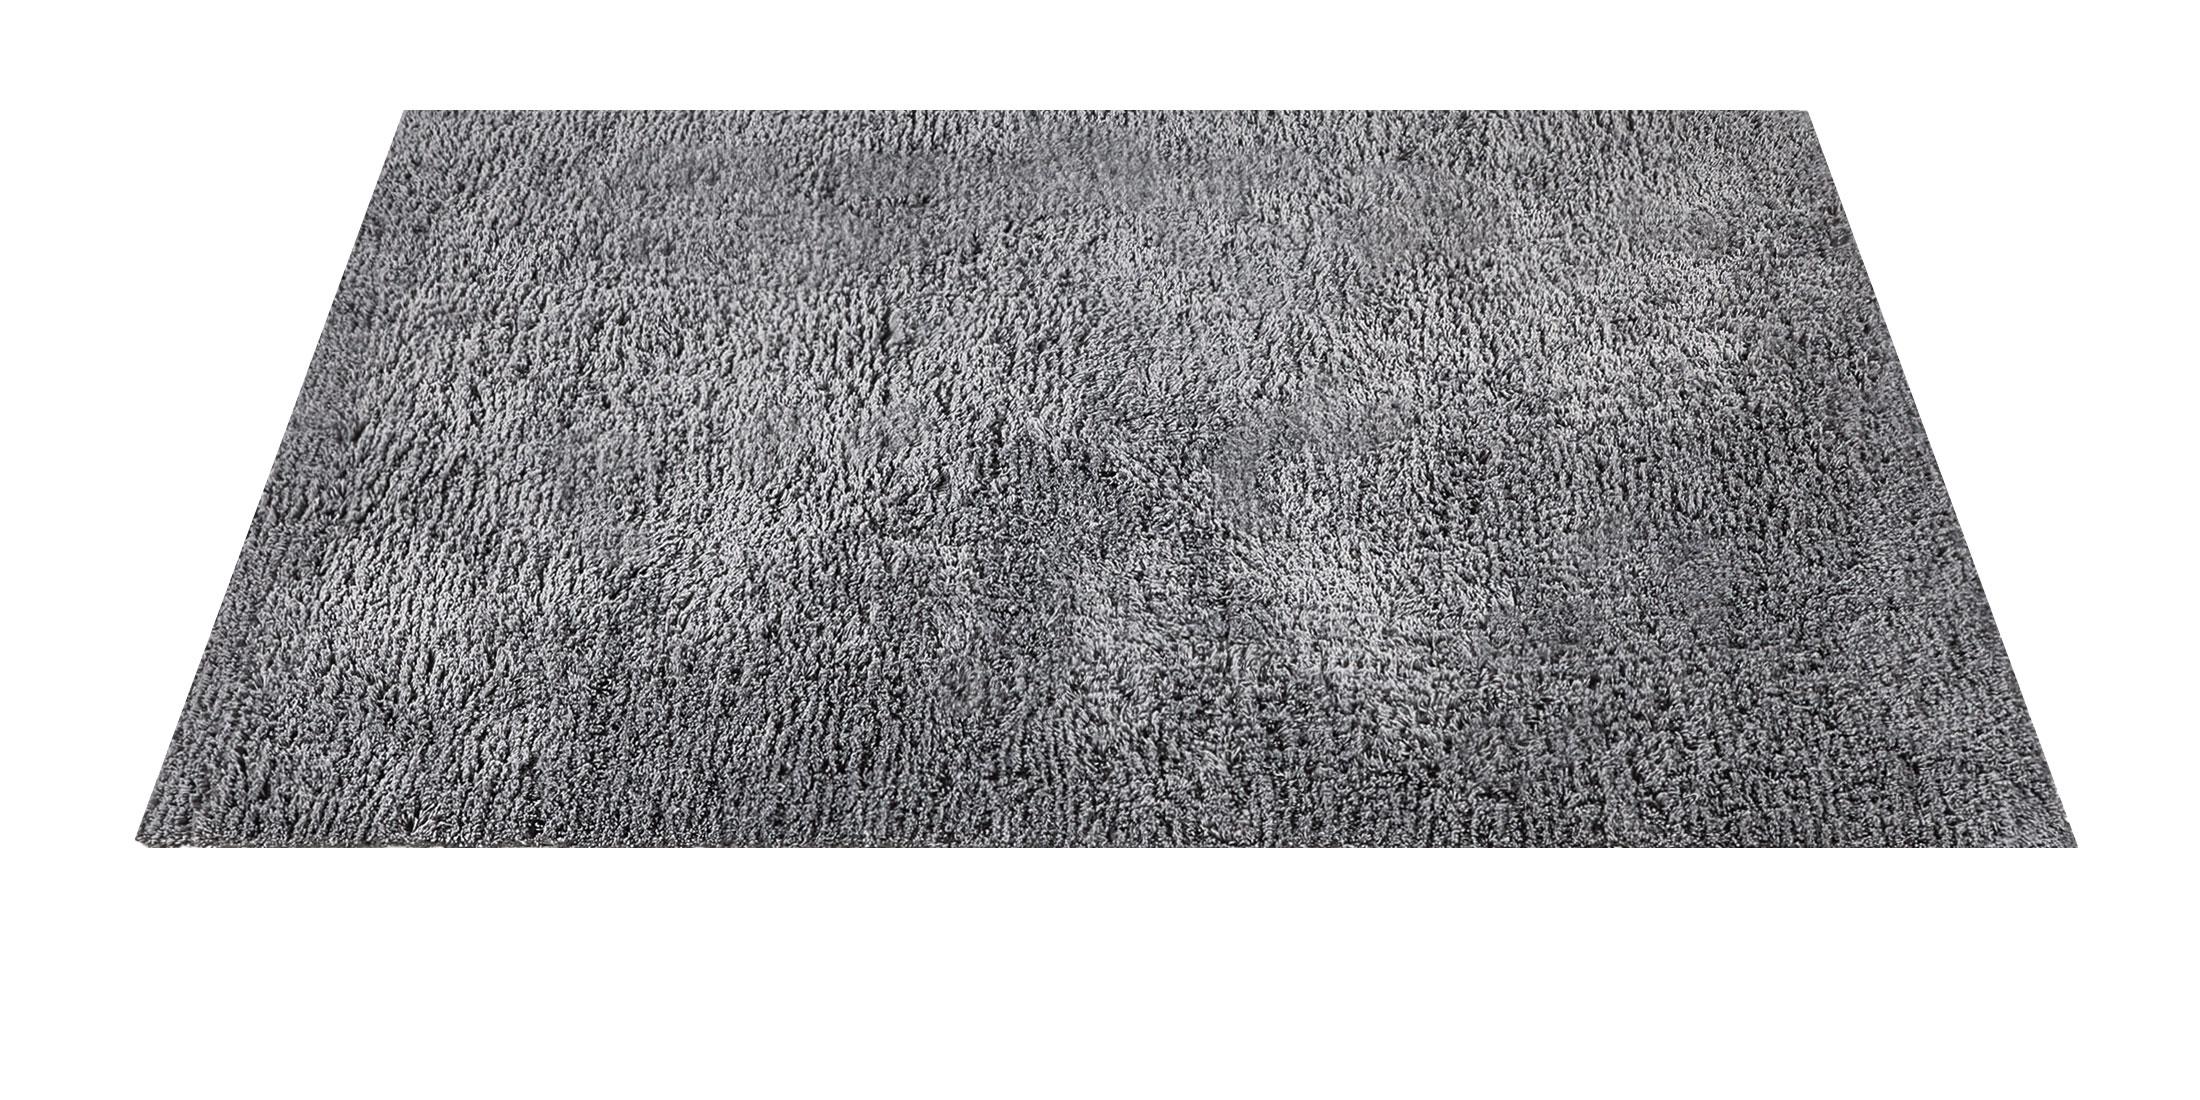 For Sale: Gray (Nickel/Carbon) Ben Soleimani Performance Shag Rug– Hand-woven Ultra-plush 9'x12' 2